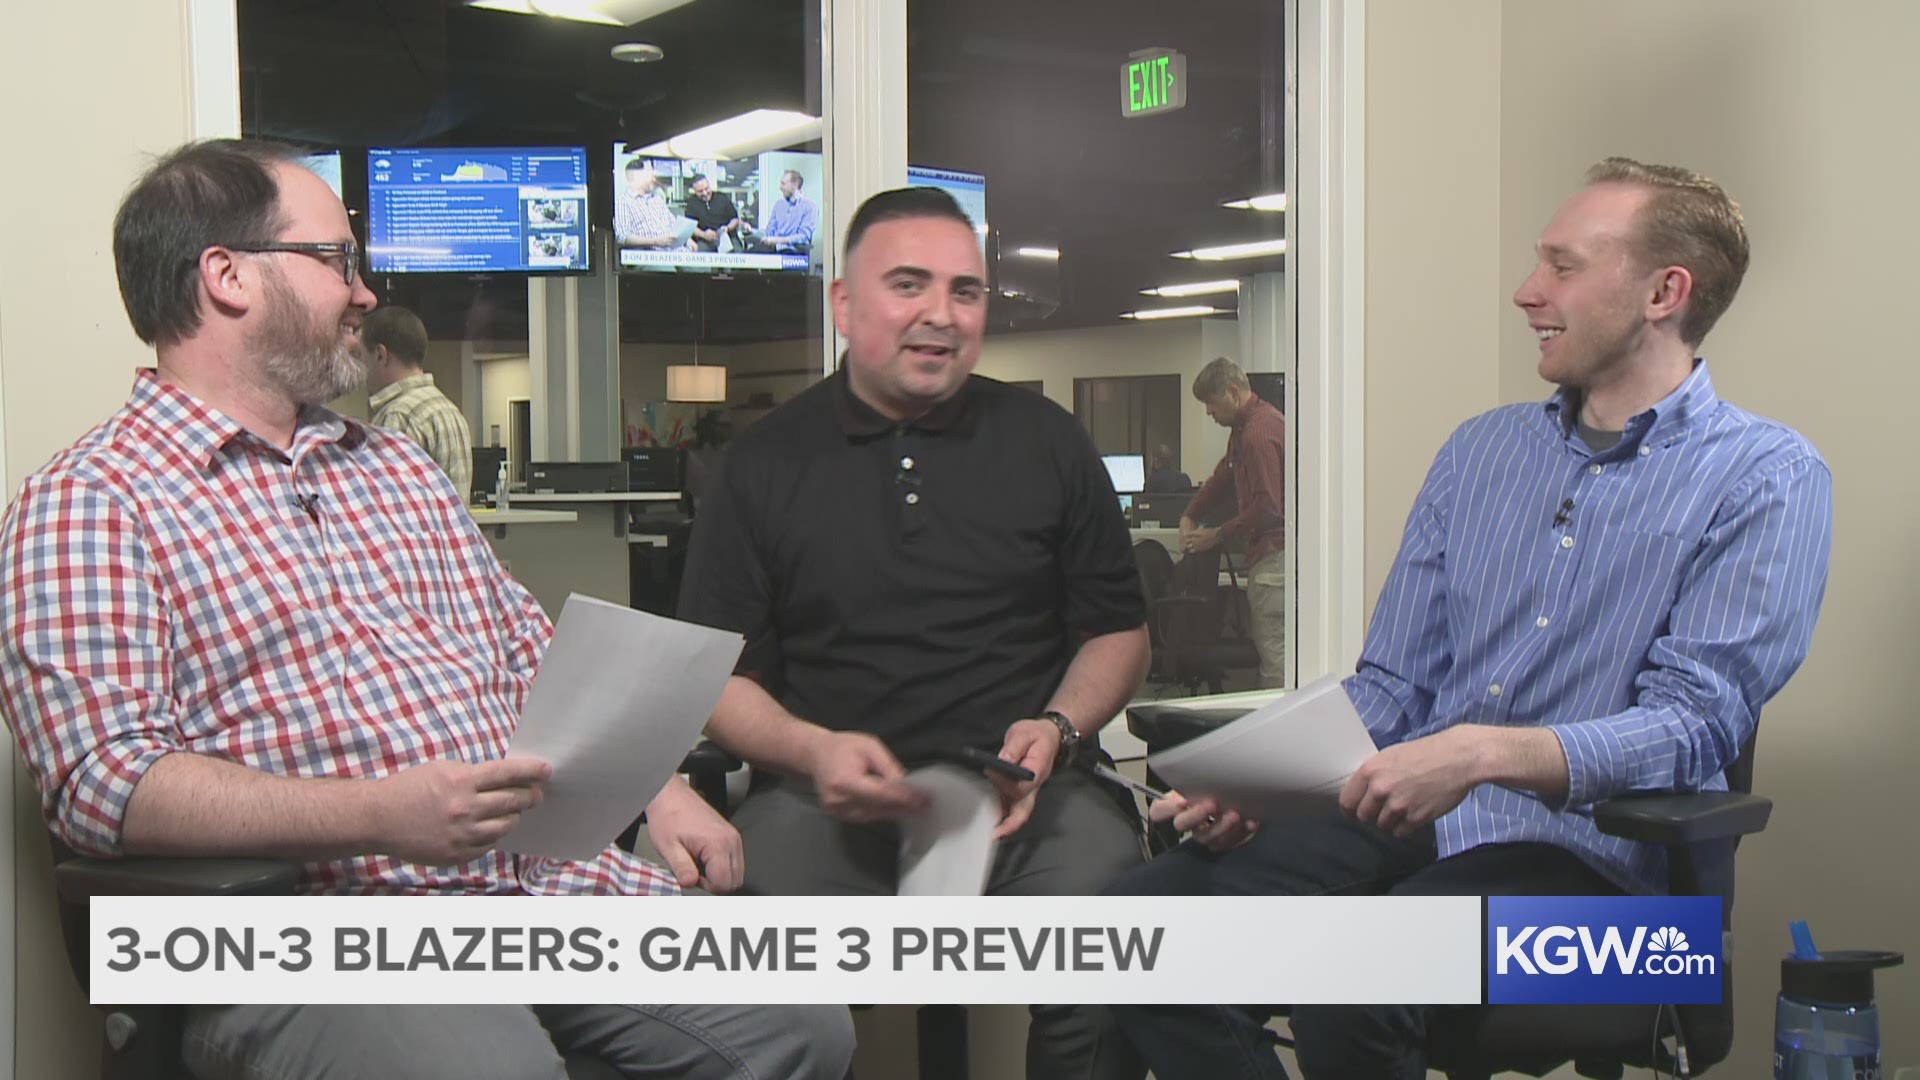 KGW's Jared Cowley, Orlando Sanchez and Nate Hanson are given a chance to revise their series predictions after the Blazers lost the first two games at home against the Pelicans.